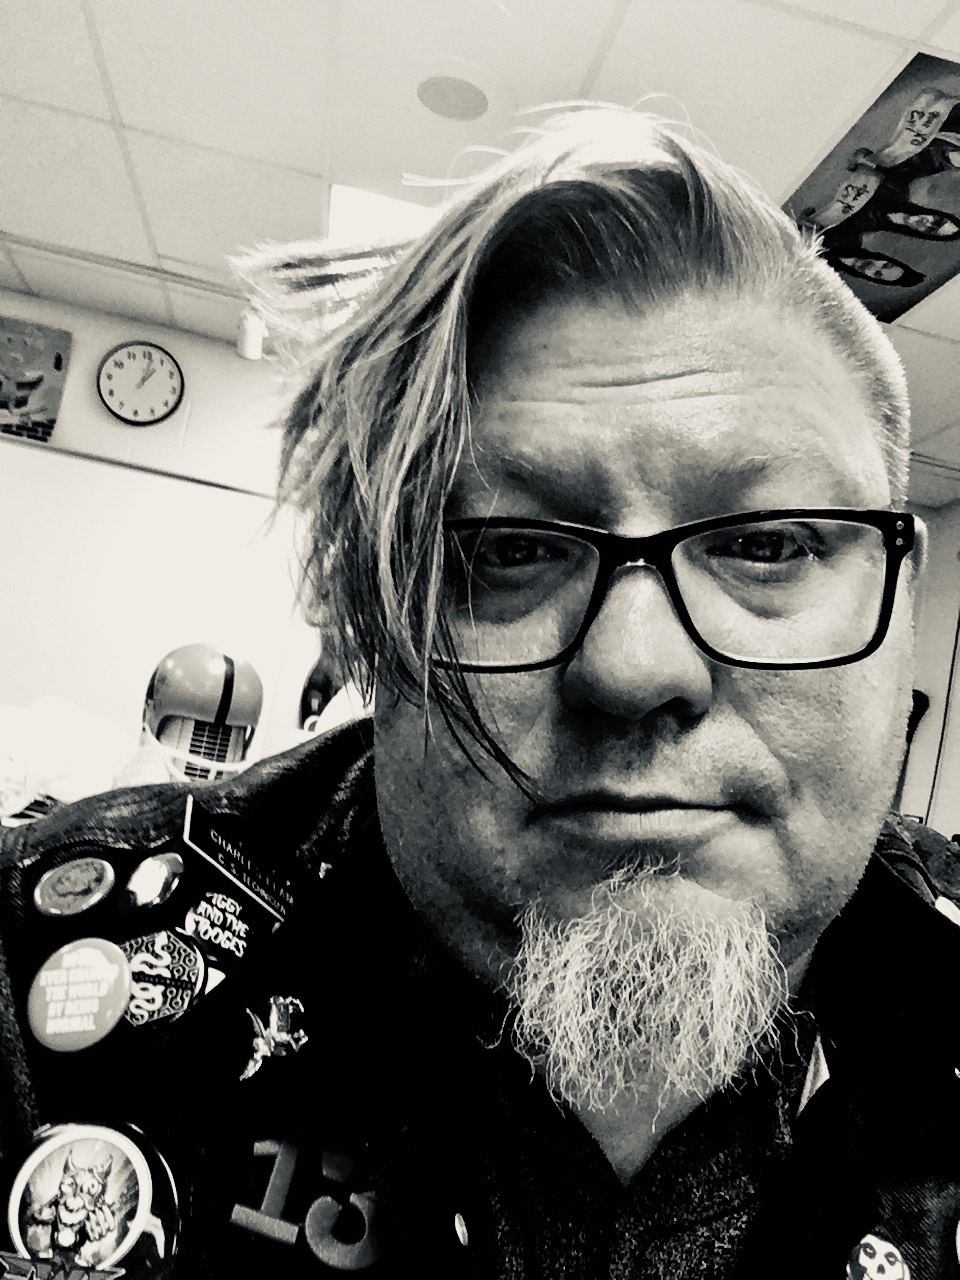 Portrait of Brent Elam. Image is black and white featuring Elam in his classroom. He is wearing a glasses and a jacket with pins on it.